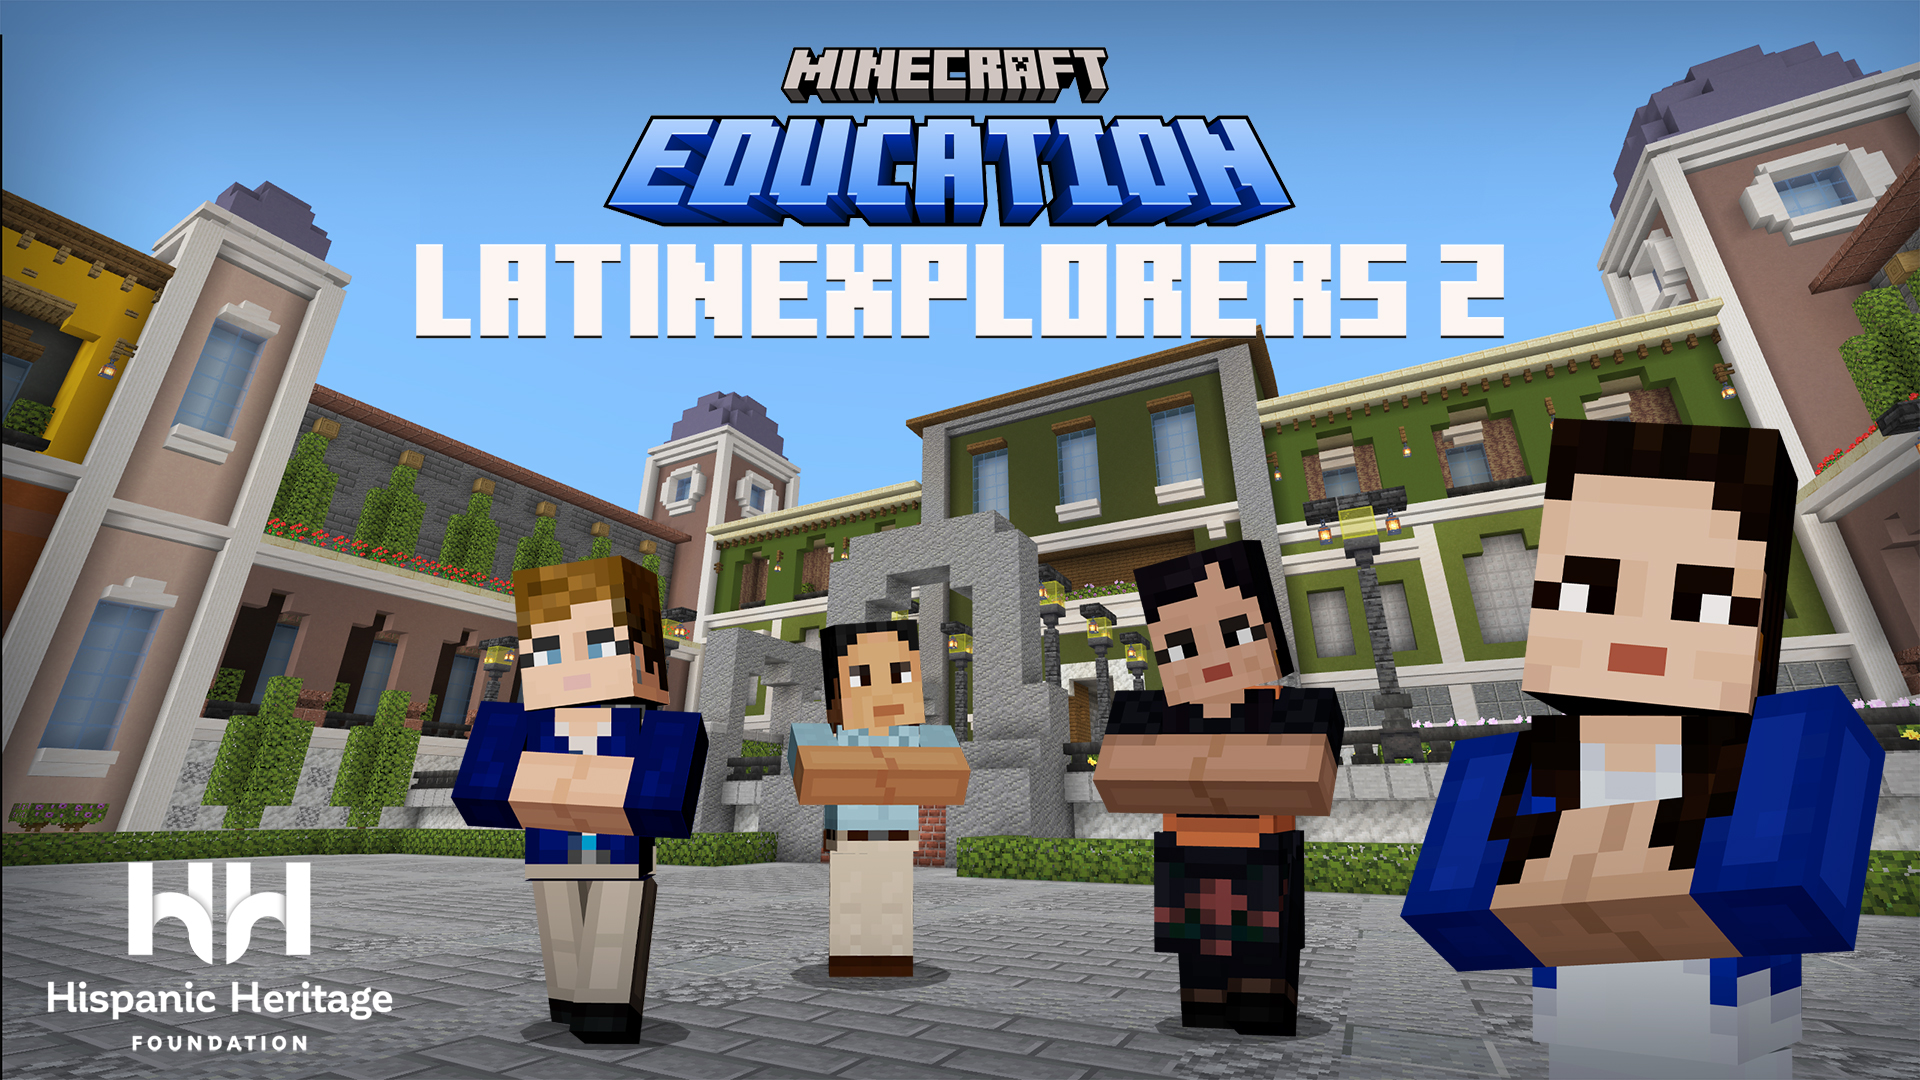 In Honor of Hispanic Heritage Month, Minecraft Education and Hispanic Heritage Foundation Join Forces in LatinExplorers 2 